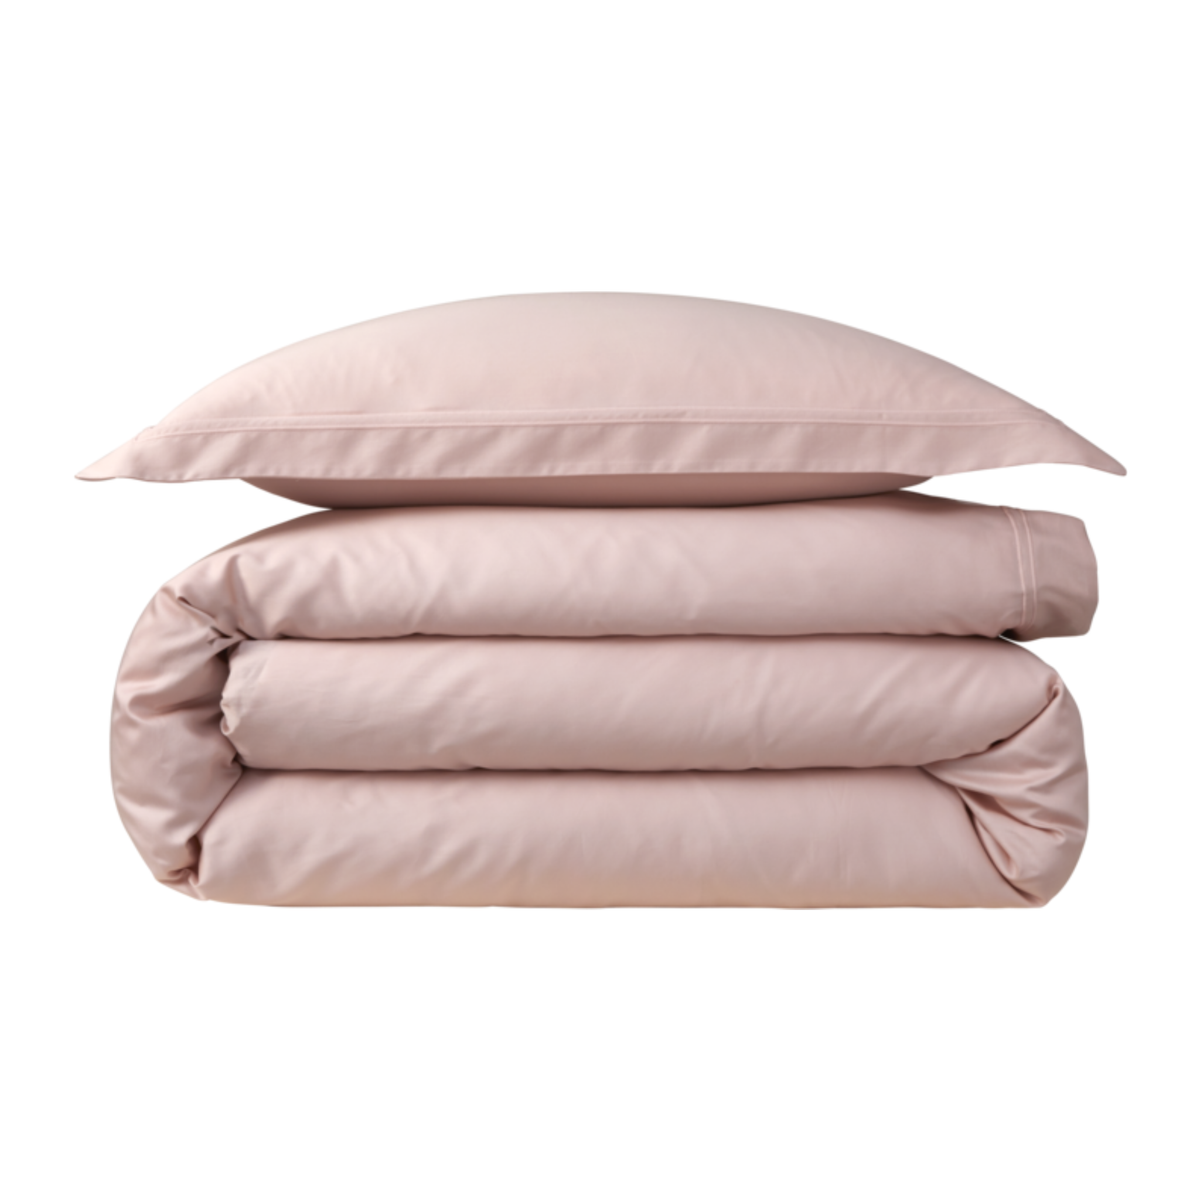 Stack of Pillow and Sheets of Yves Delorme Triomphe Bedding in Poudre Color